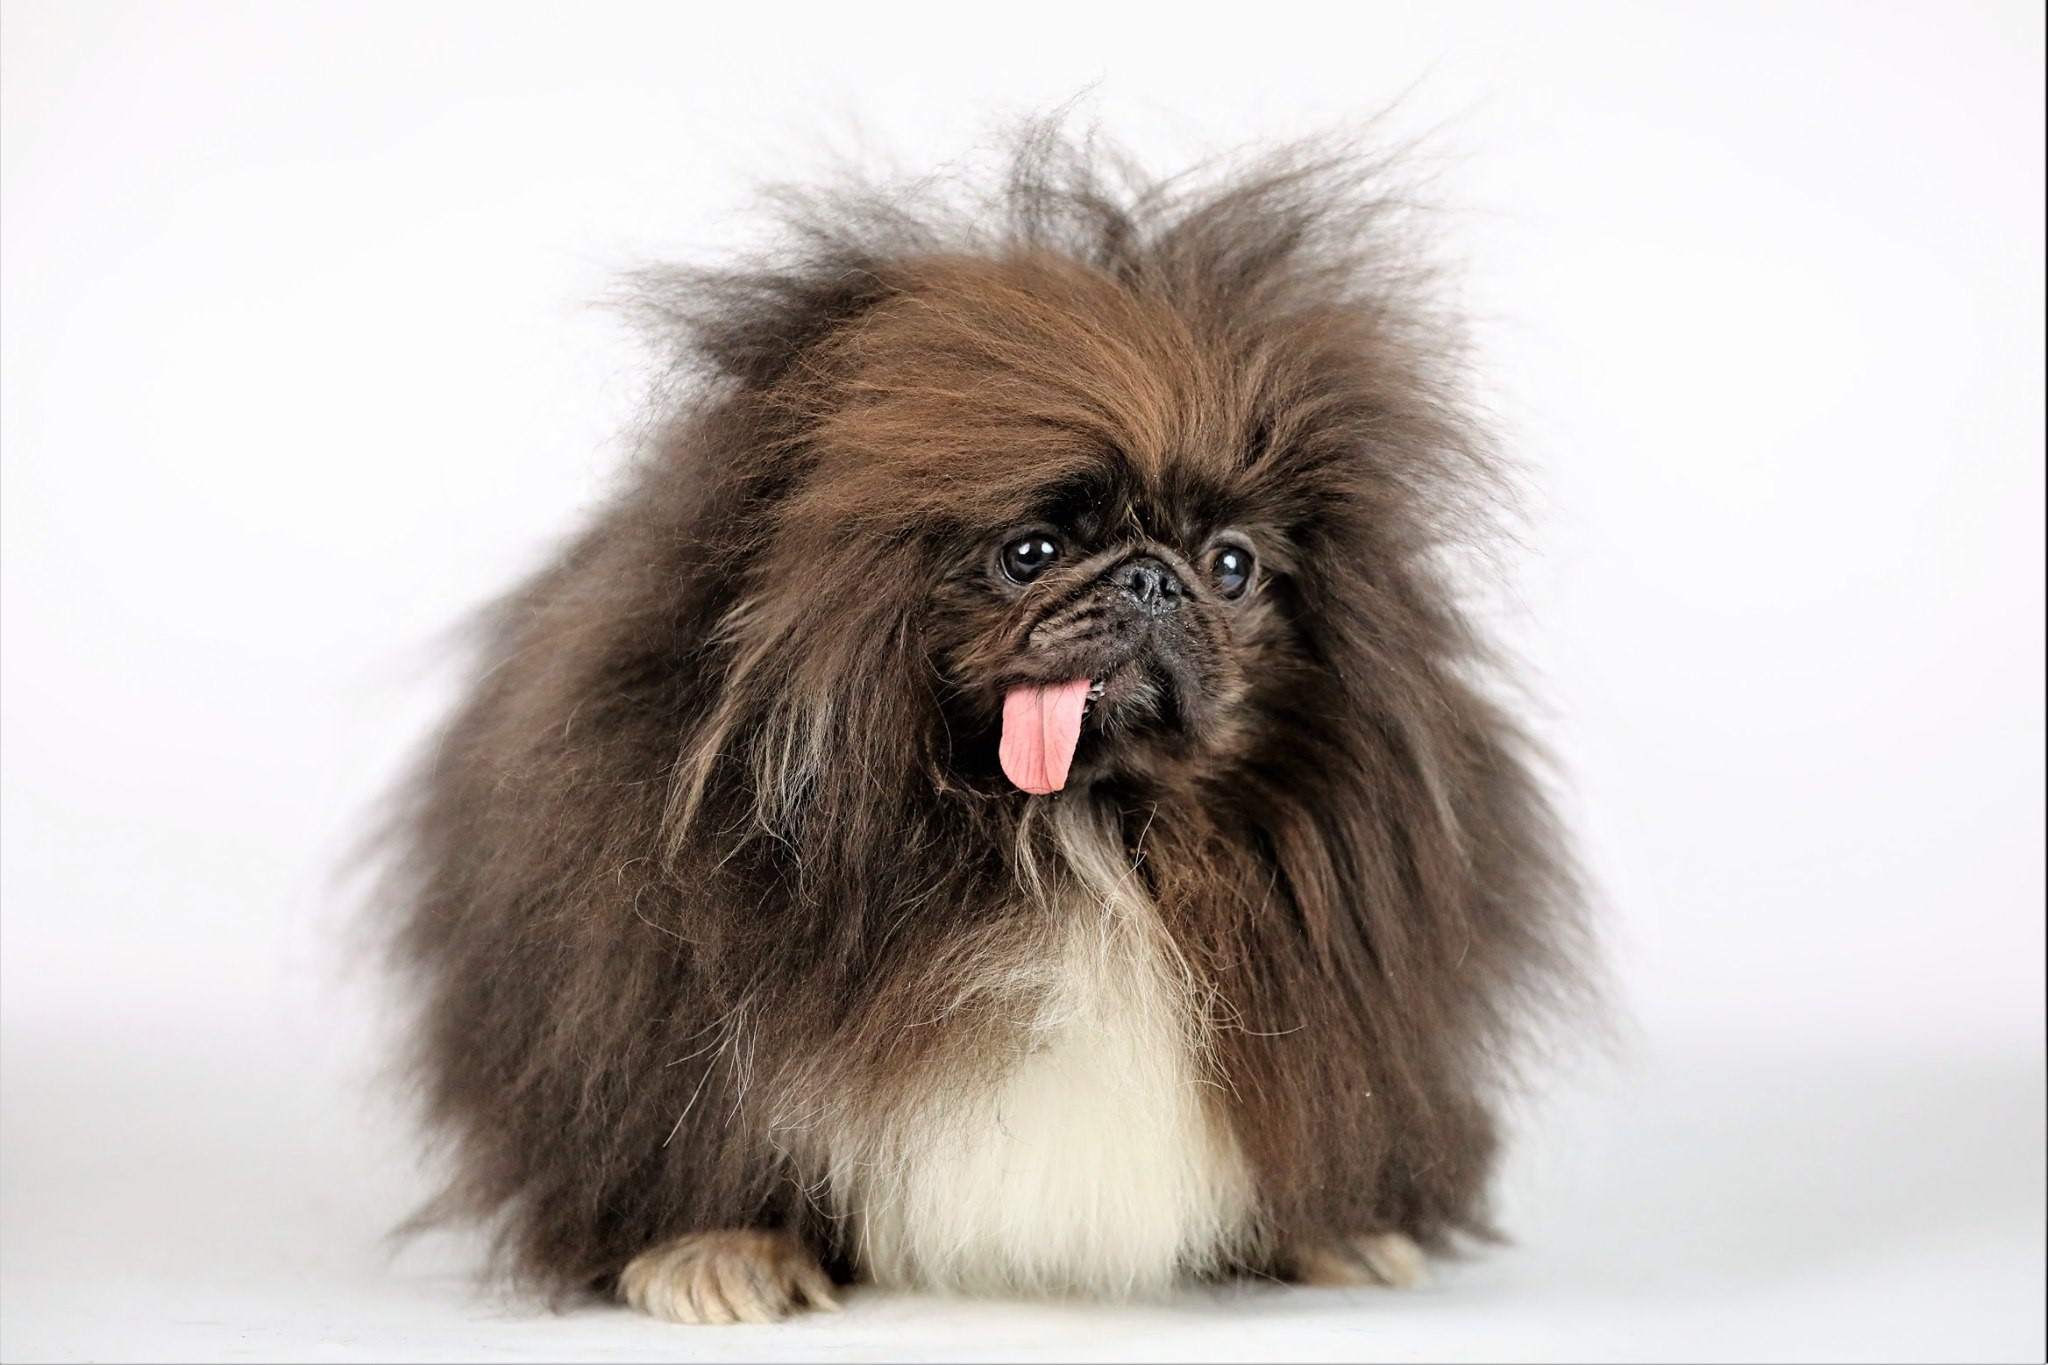 World’s Ugliest Dog 2019: The Beauty Contest You Didn’t Know We Needed